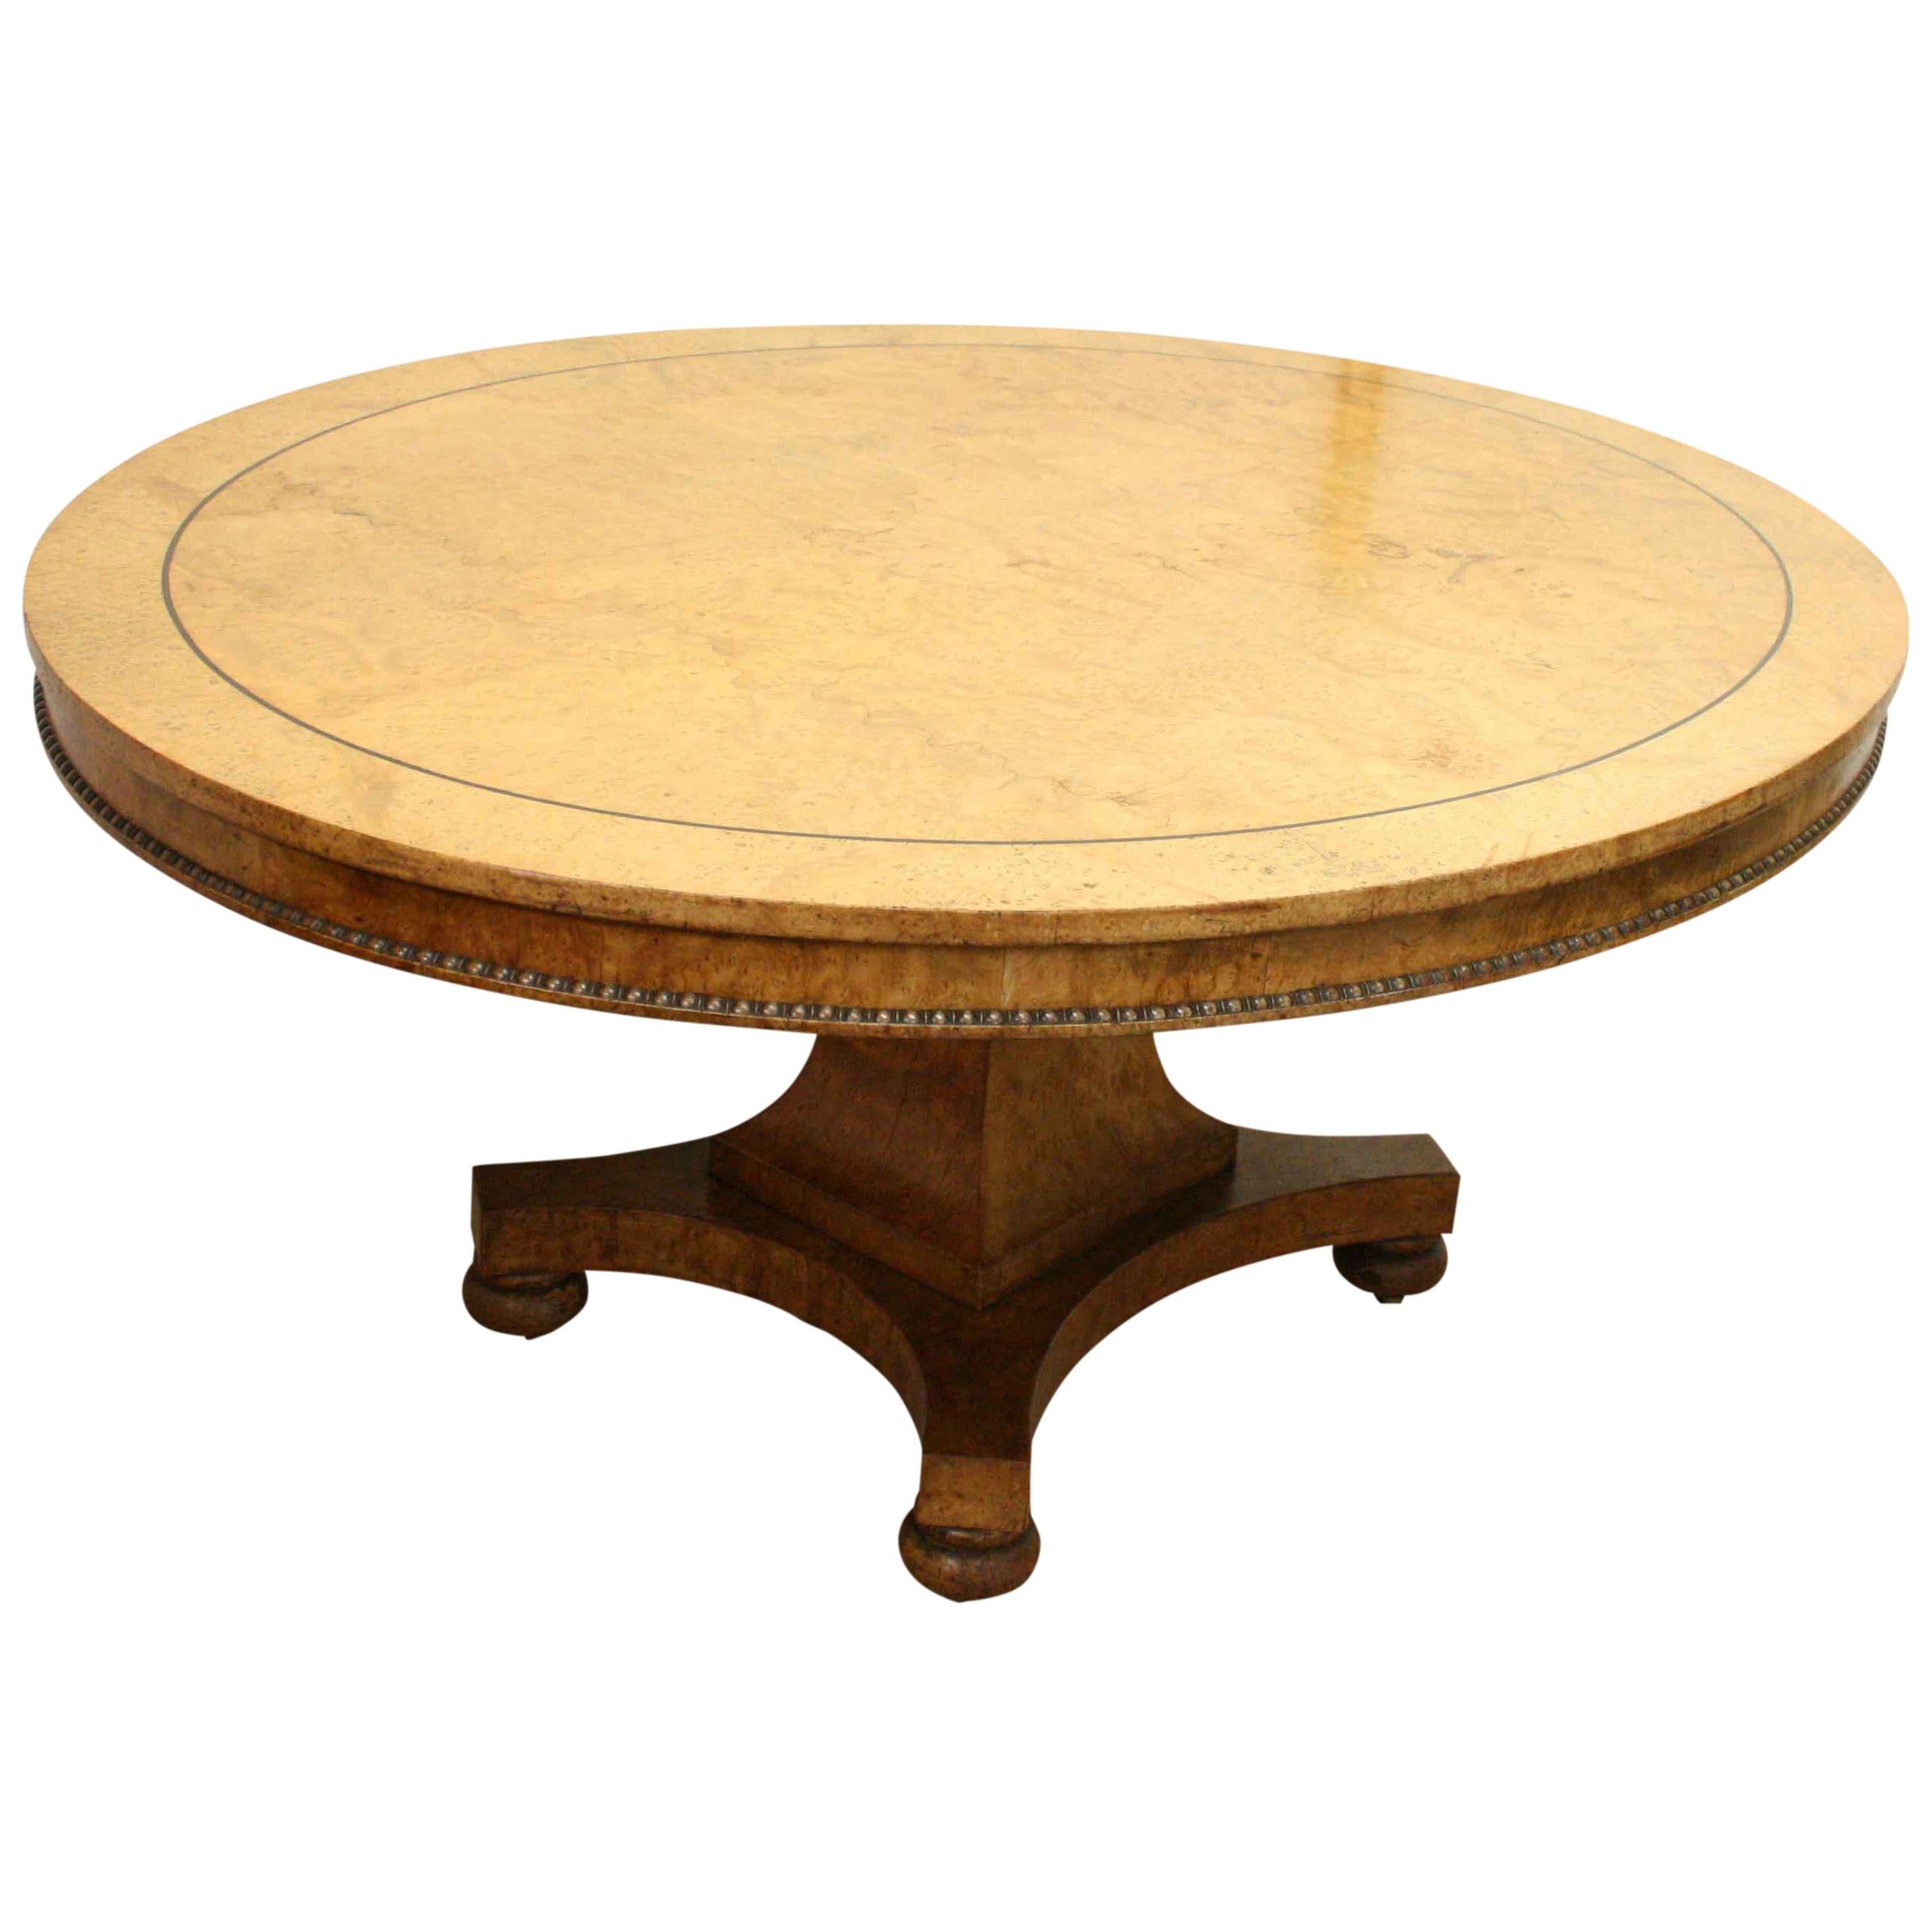 George IV pollard oak oval breakfast table by William Trotter of Edinburgh, circa 1820. The oval shaped top is in mahogany with quarter veneers and a selection of timbers, with a large ebonised string inlay. The fore edge is veneered in the same